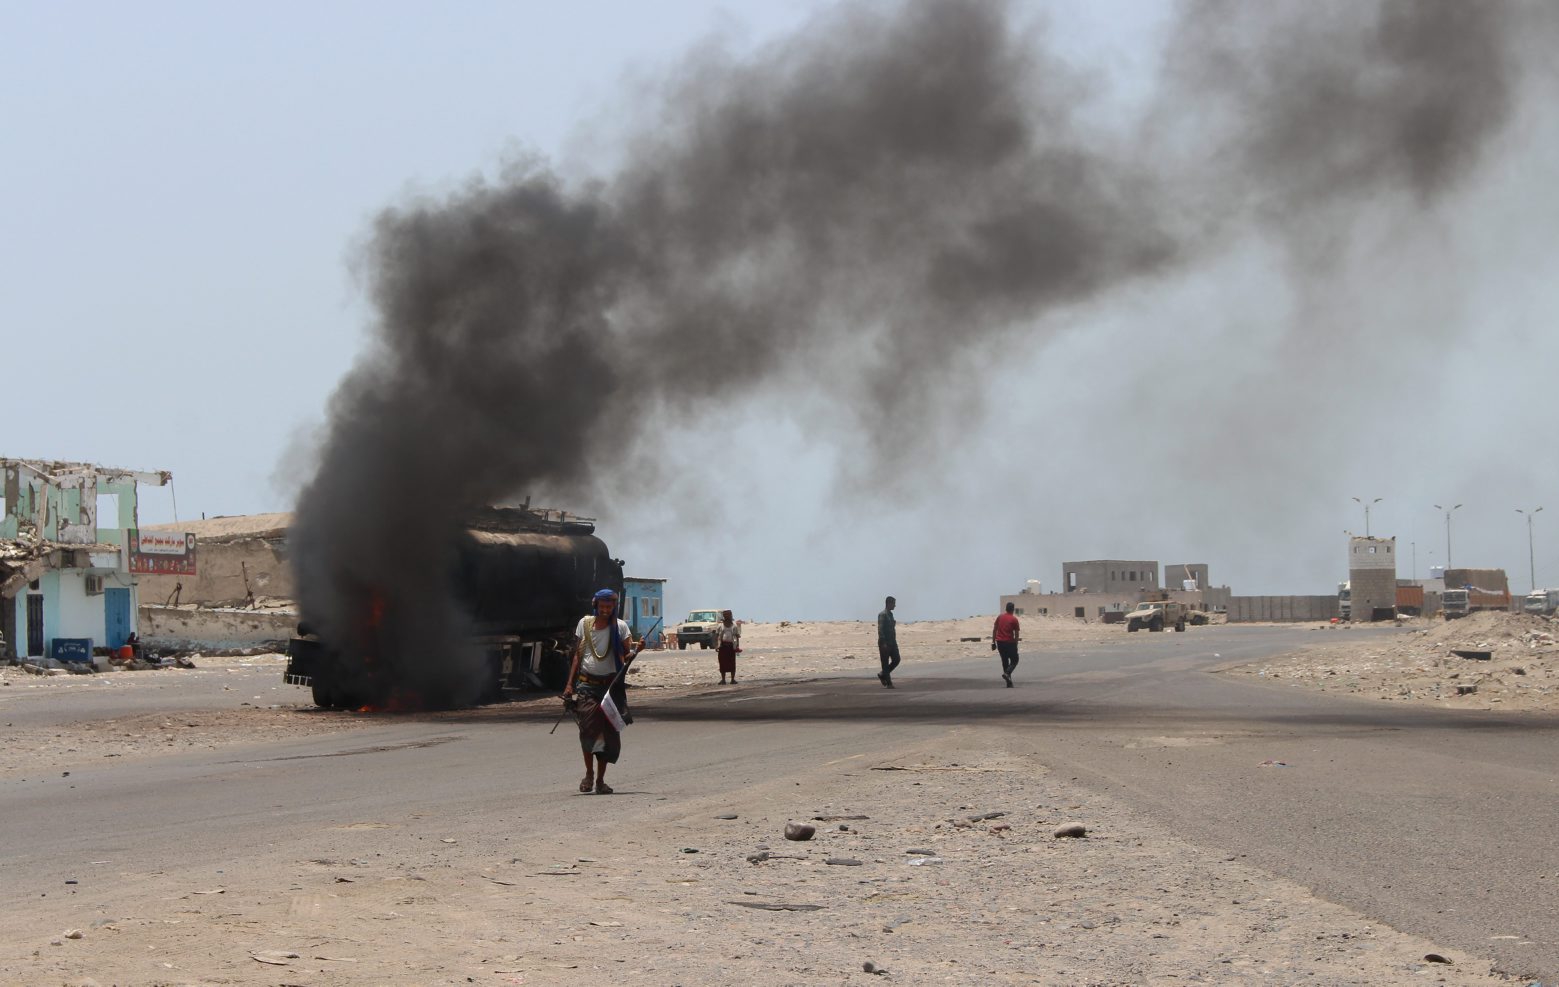 People inspect an oil tanker truck set ablaze during recent clashes between Yemeni southern separatists and government forces near Aden, Yemen, Friday, Aug. 30, 2019.Â (AP Photo/Wail al-Qubaty) APTOPIX Yemen